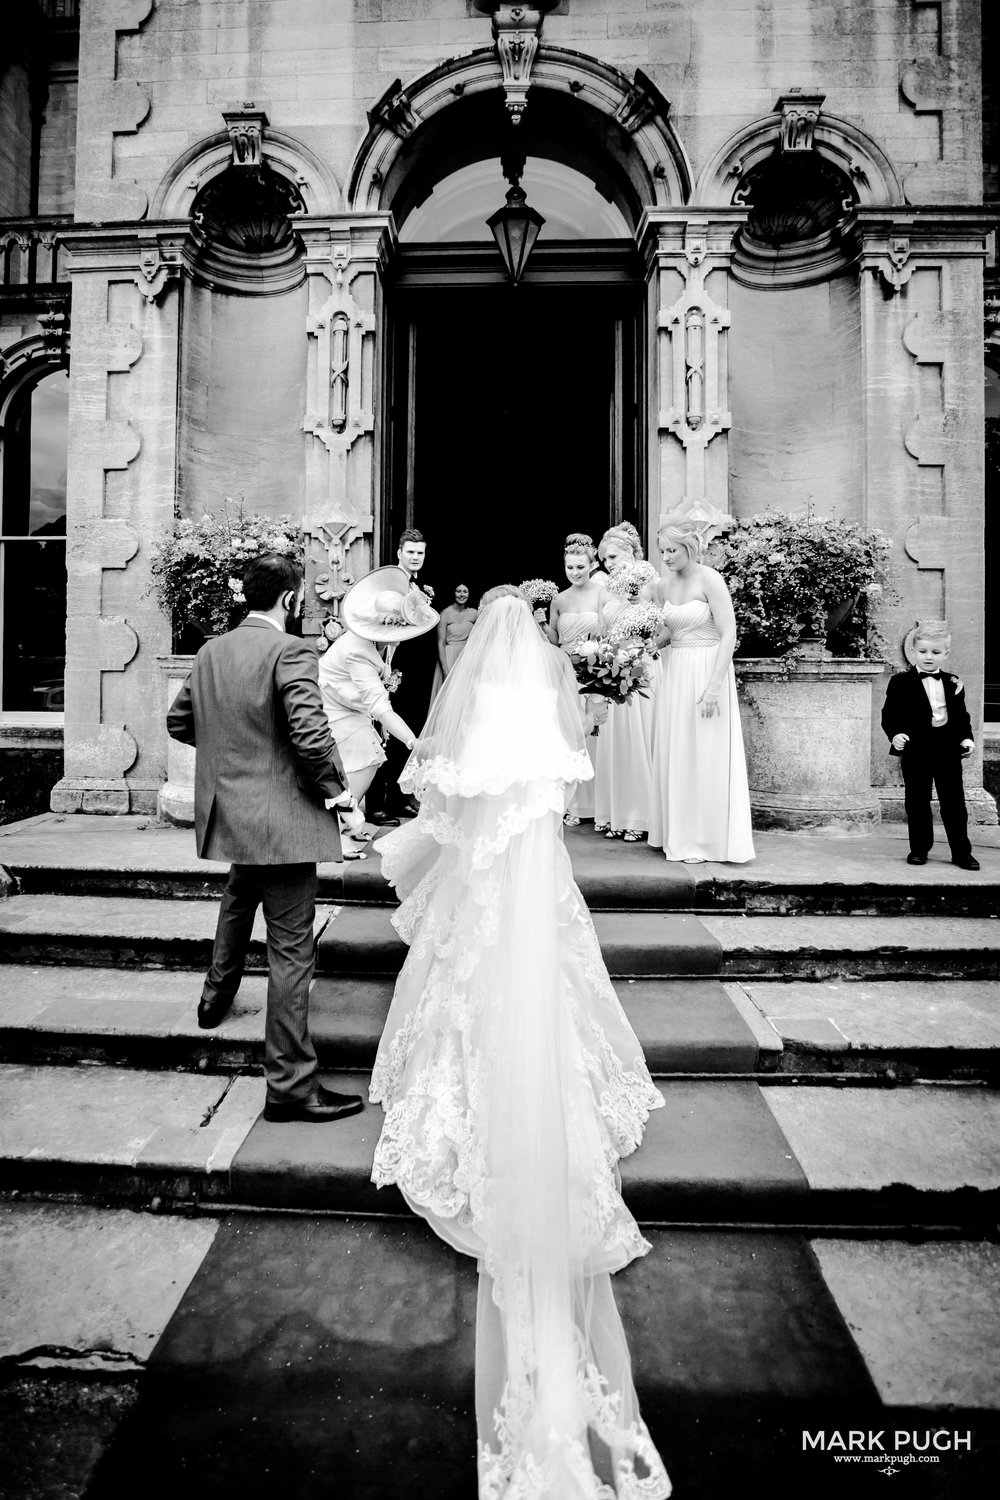 067 - Leah and Andy - fineART wedding photography at Stoke Rochford Hall NG33 5EJ by www.markpugh.com Mark Pugh of www.mpmedia.co.uk_.JPG